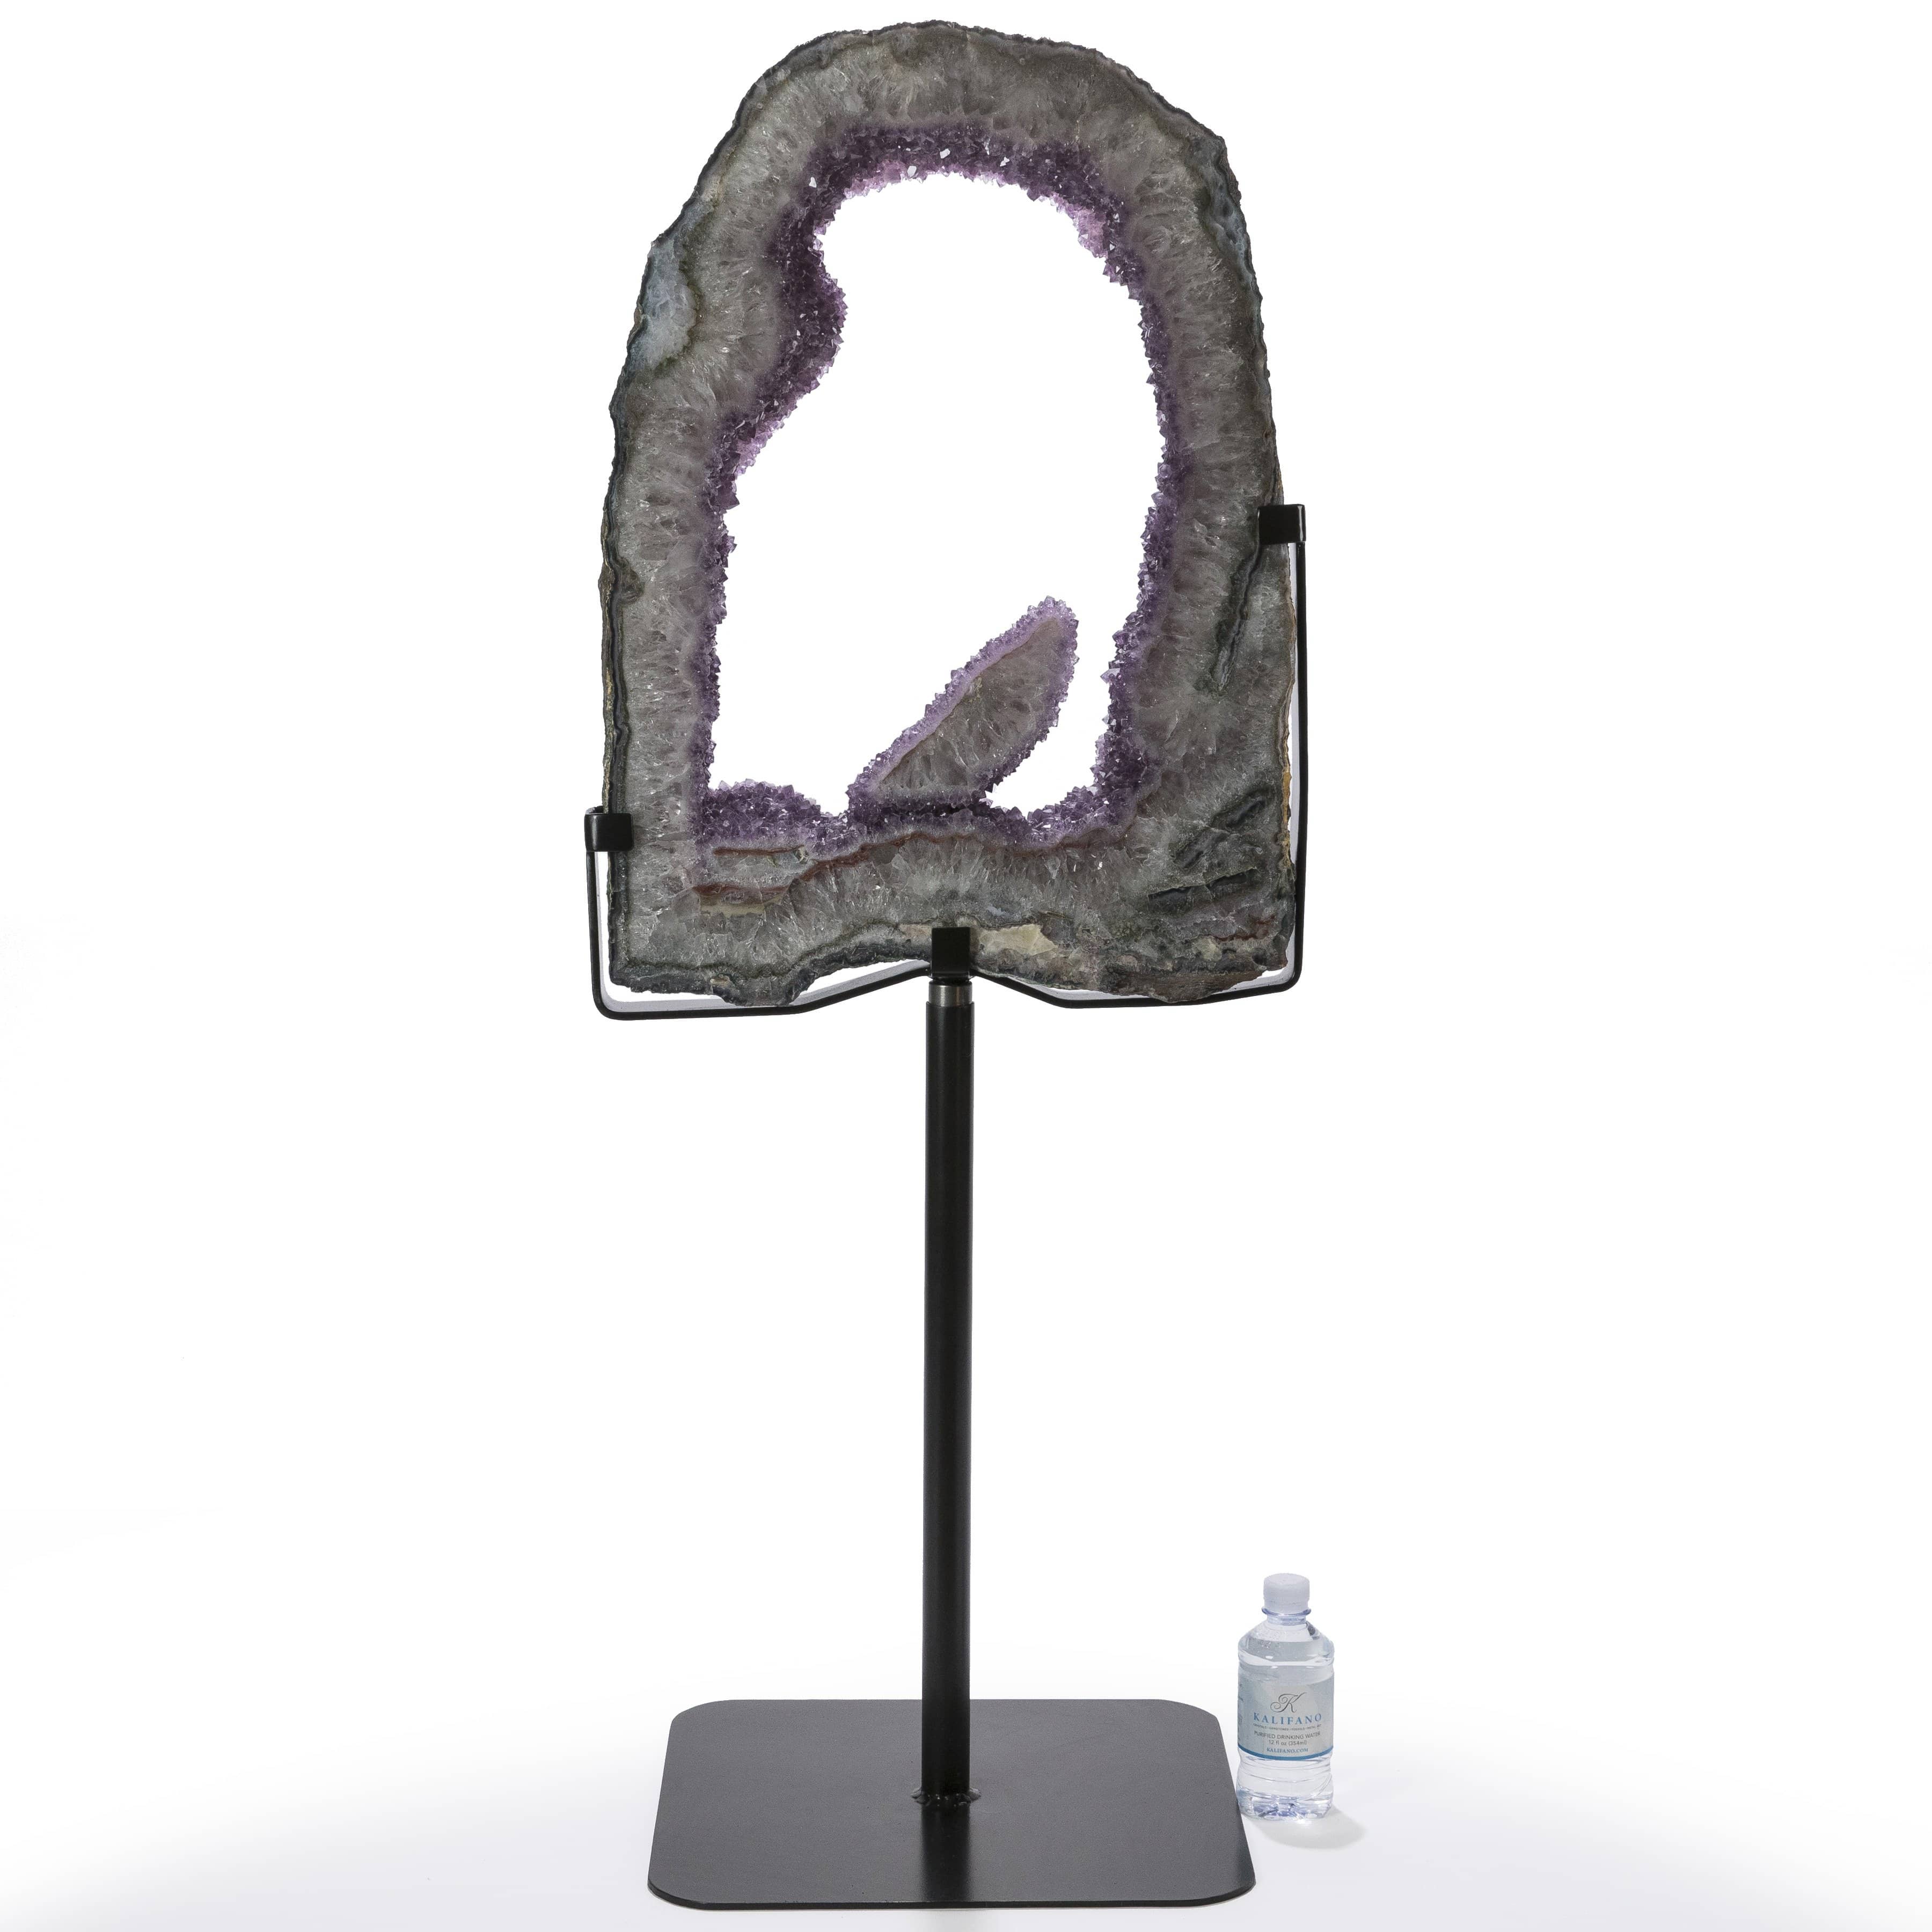 Kalifano Amethyst Natural Brazilian Amethyst Geode Slice on Stand - 46 in / 66 lbs BAG18000.001